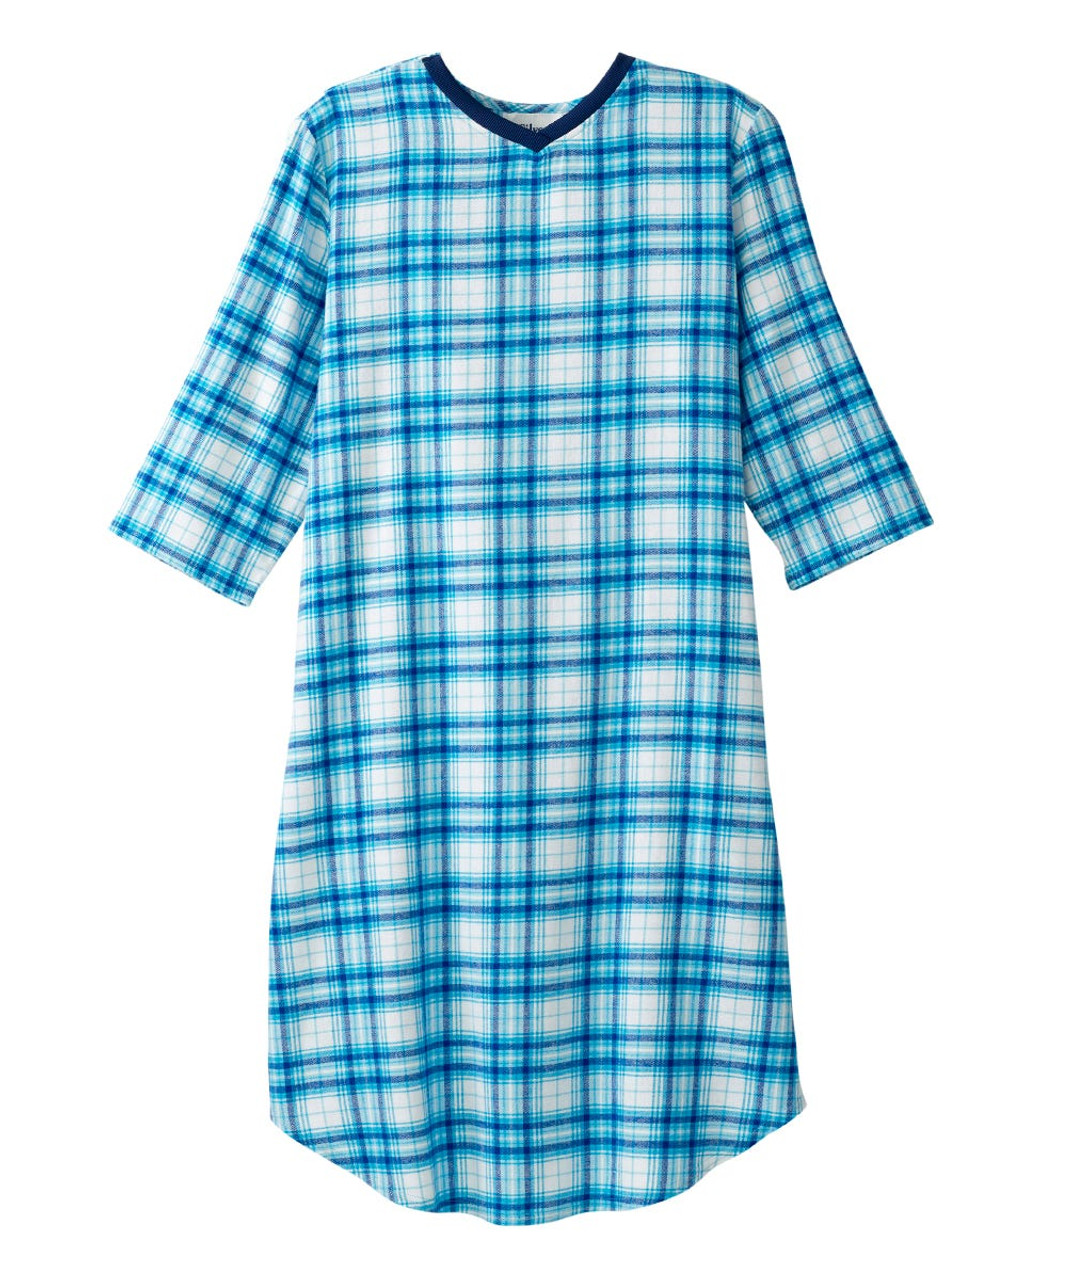 Silverts SV50120 Senior Men's Adaptive Open Back Flannel Nightgown Turquoise Plaid, Size=3XL, SV50120-TQUP-3XL